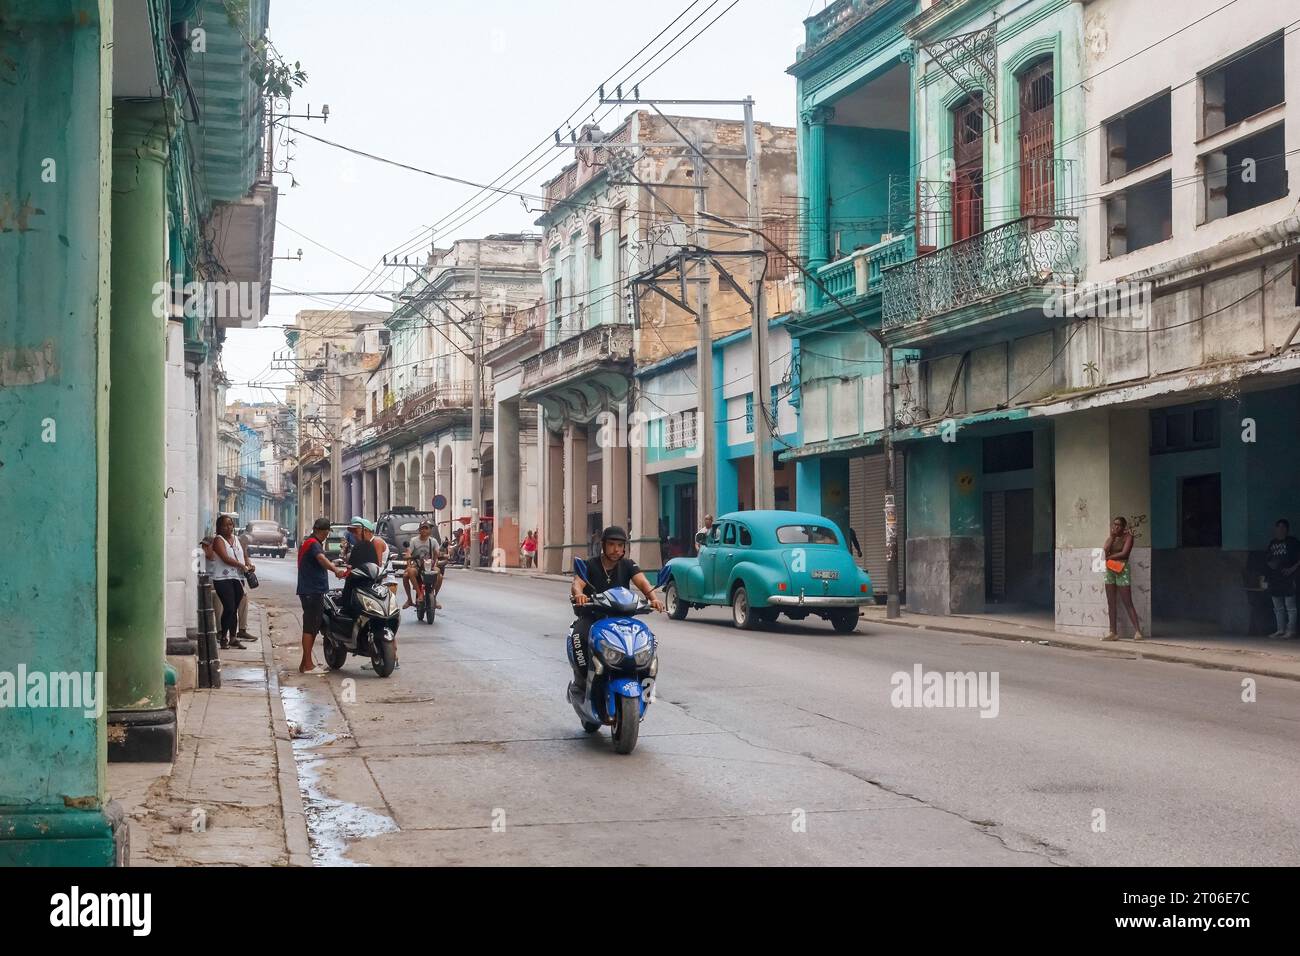 A person drives an electric bicycle on a city avenue. Other incidental people are in the street scene. Weathered buildings to both sides of the urban Stock Photo